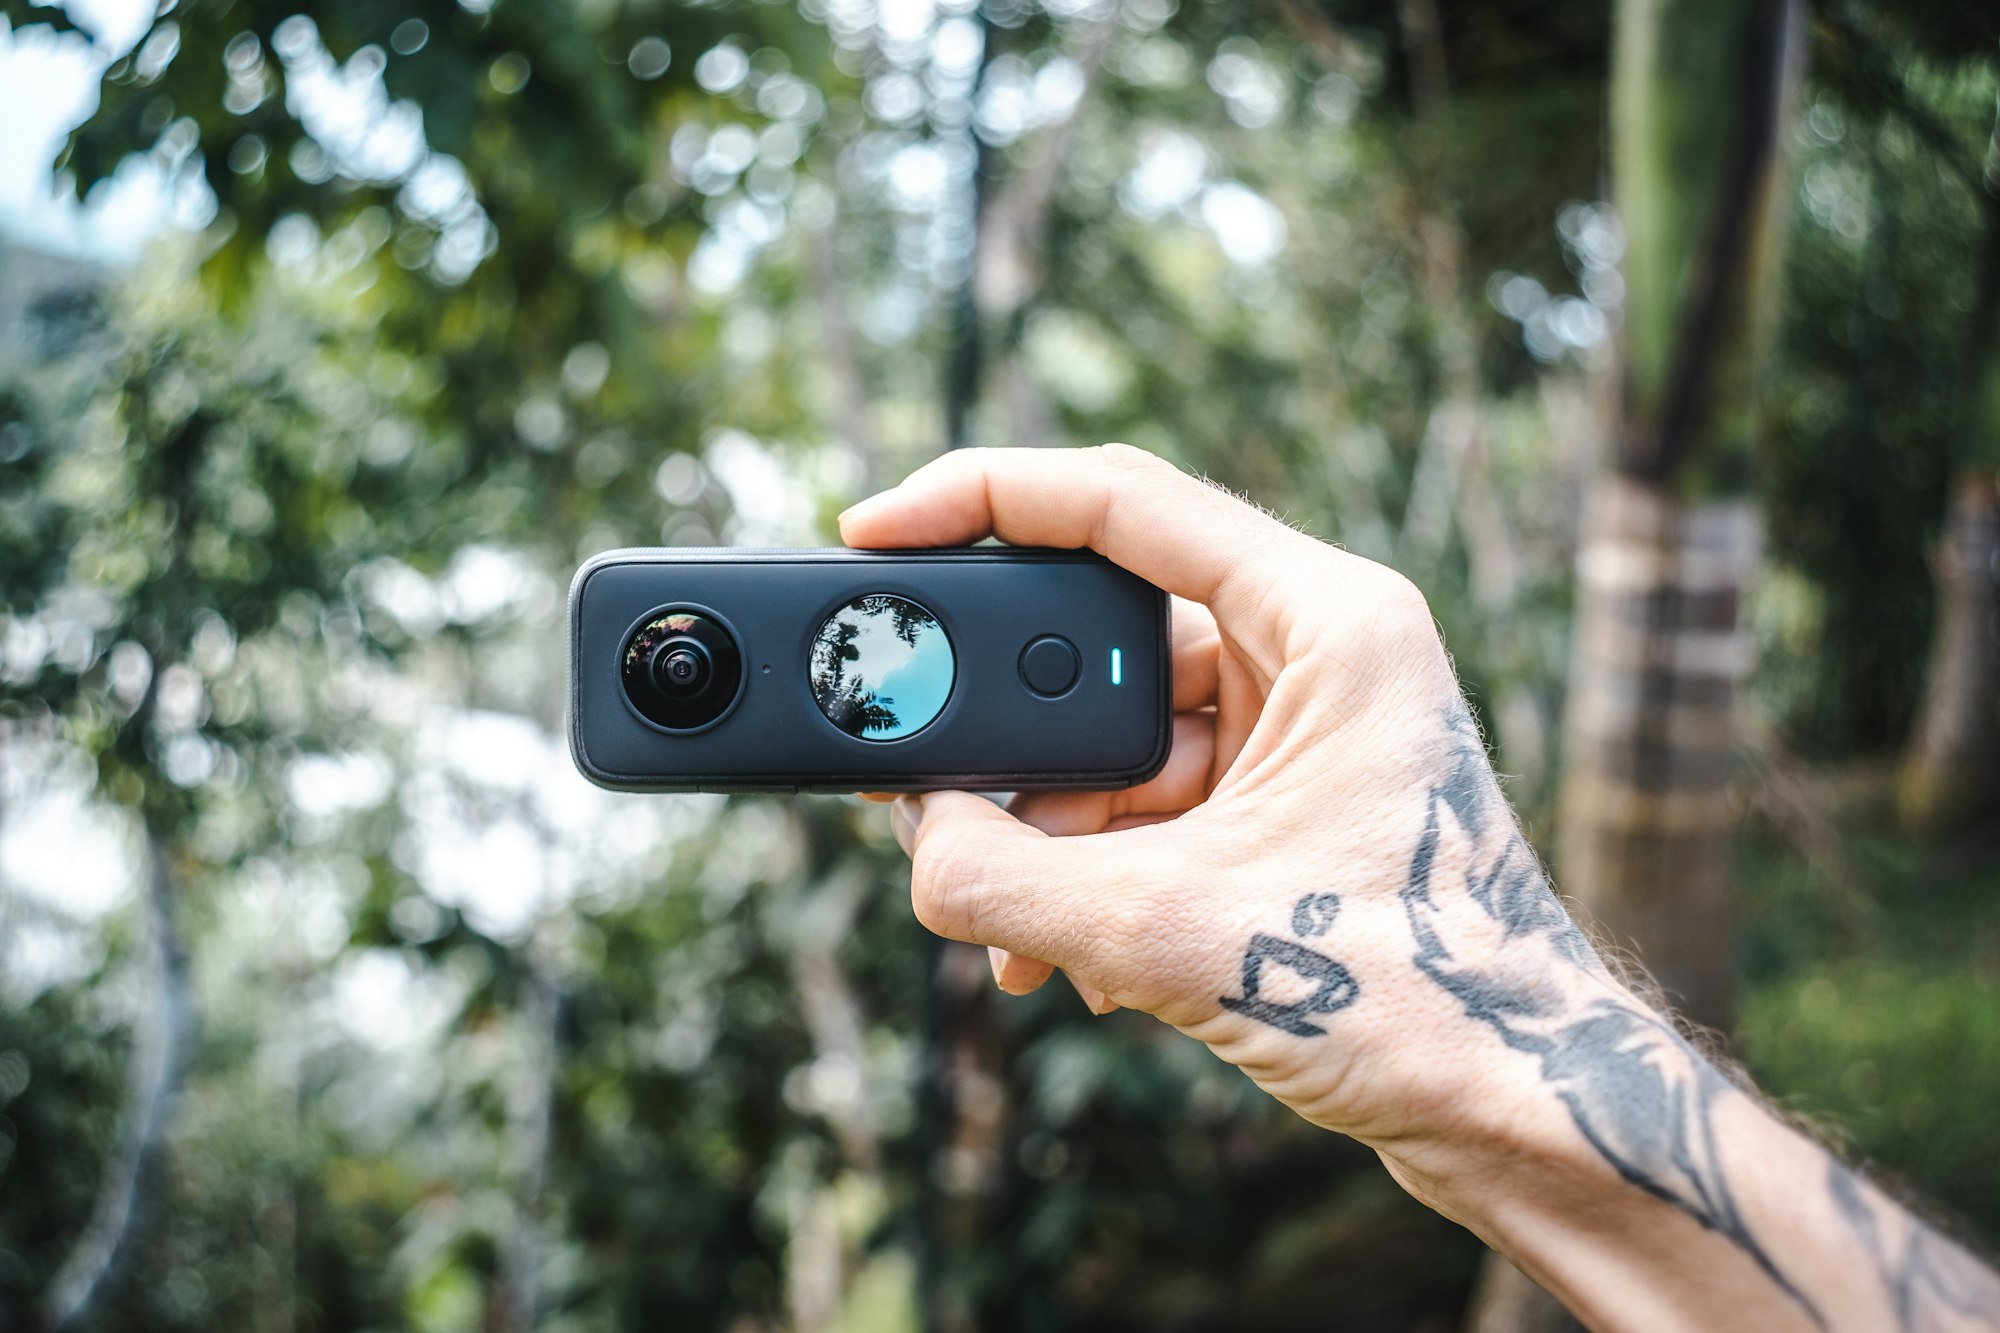 A cameraman is holding up an Insta360 ONE X2 360 action camera outdoor